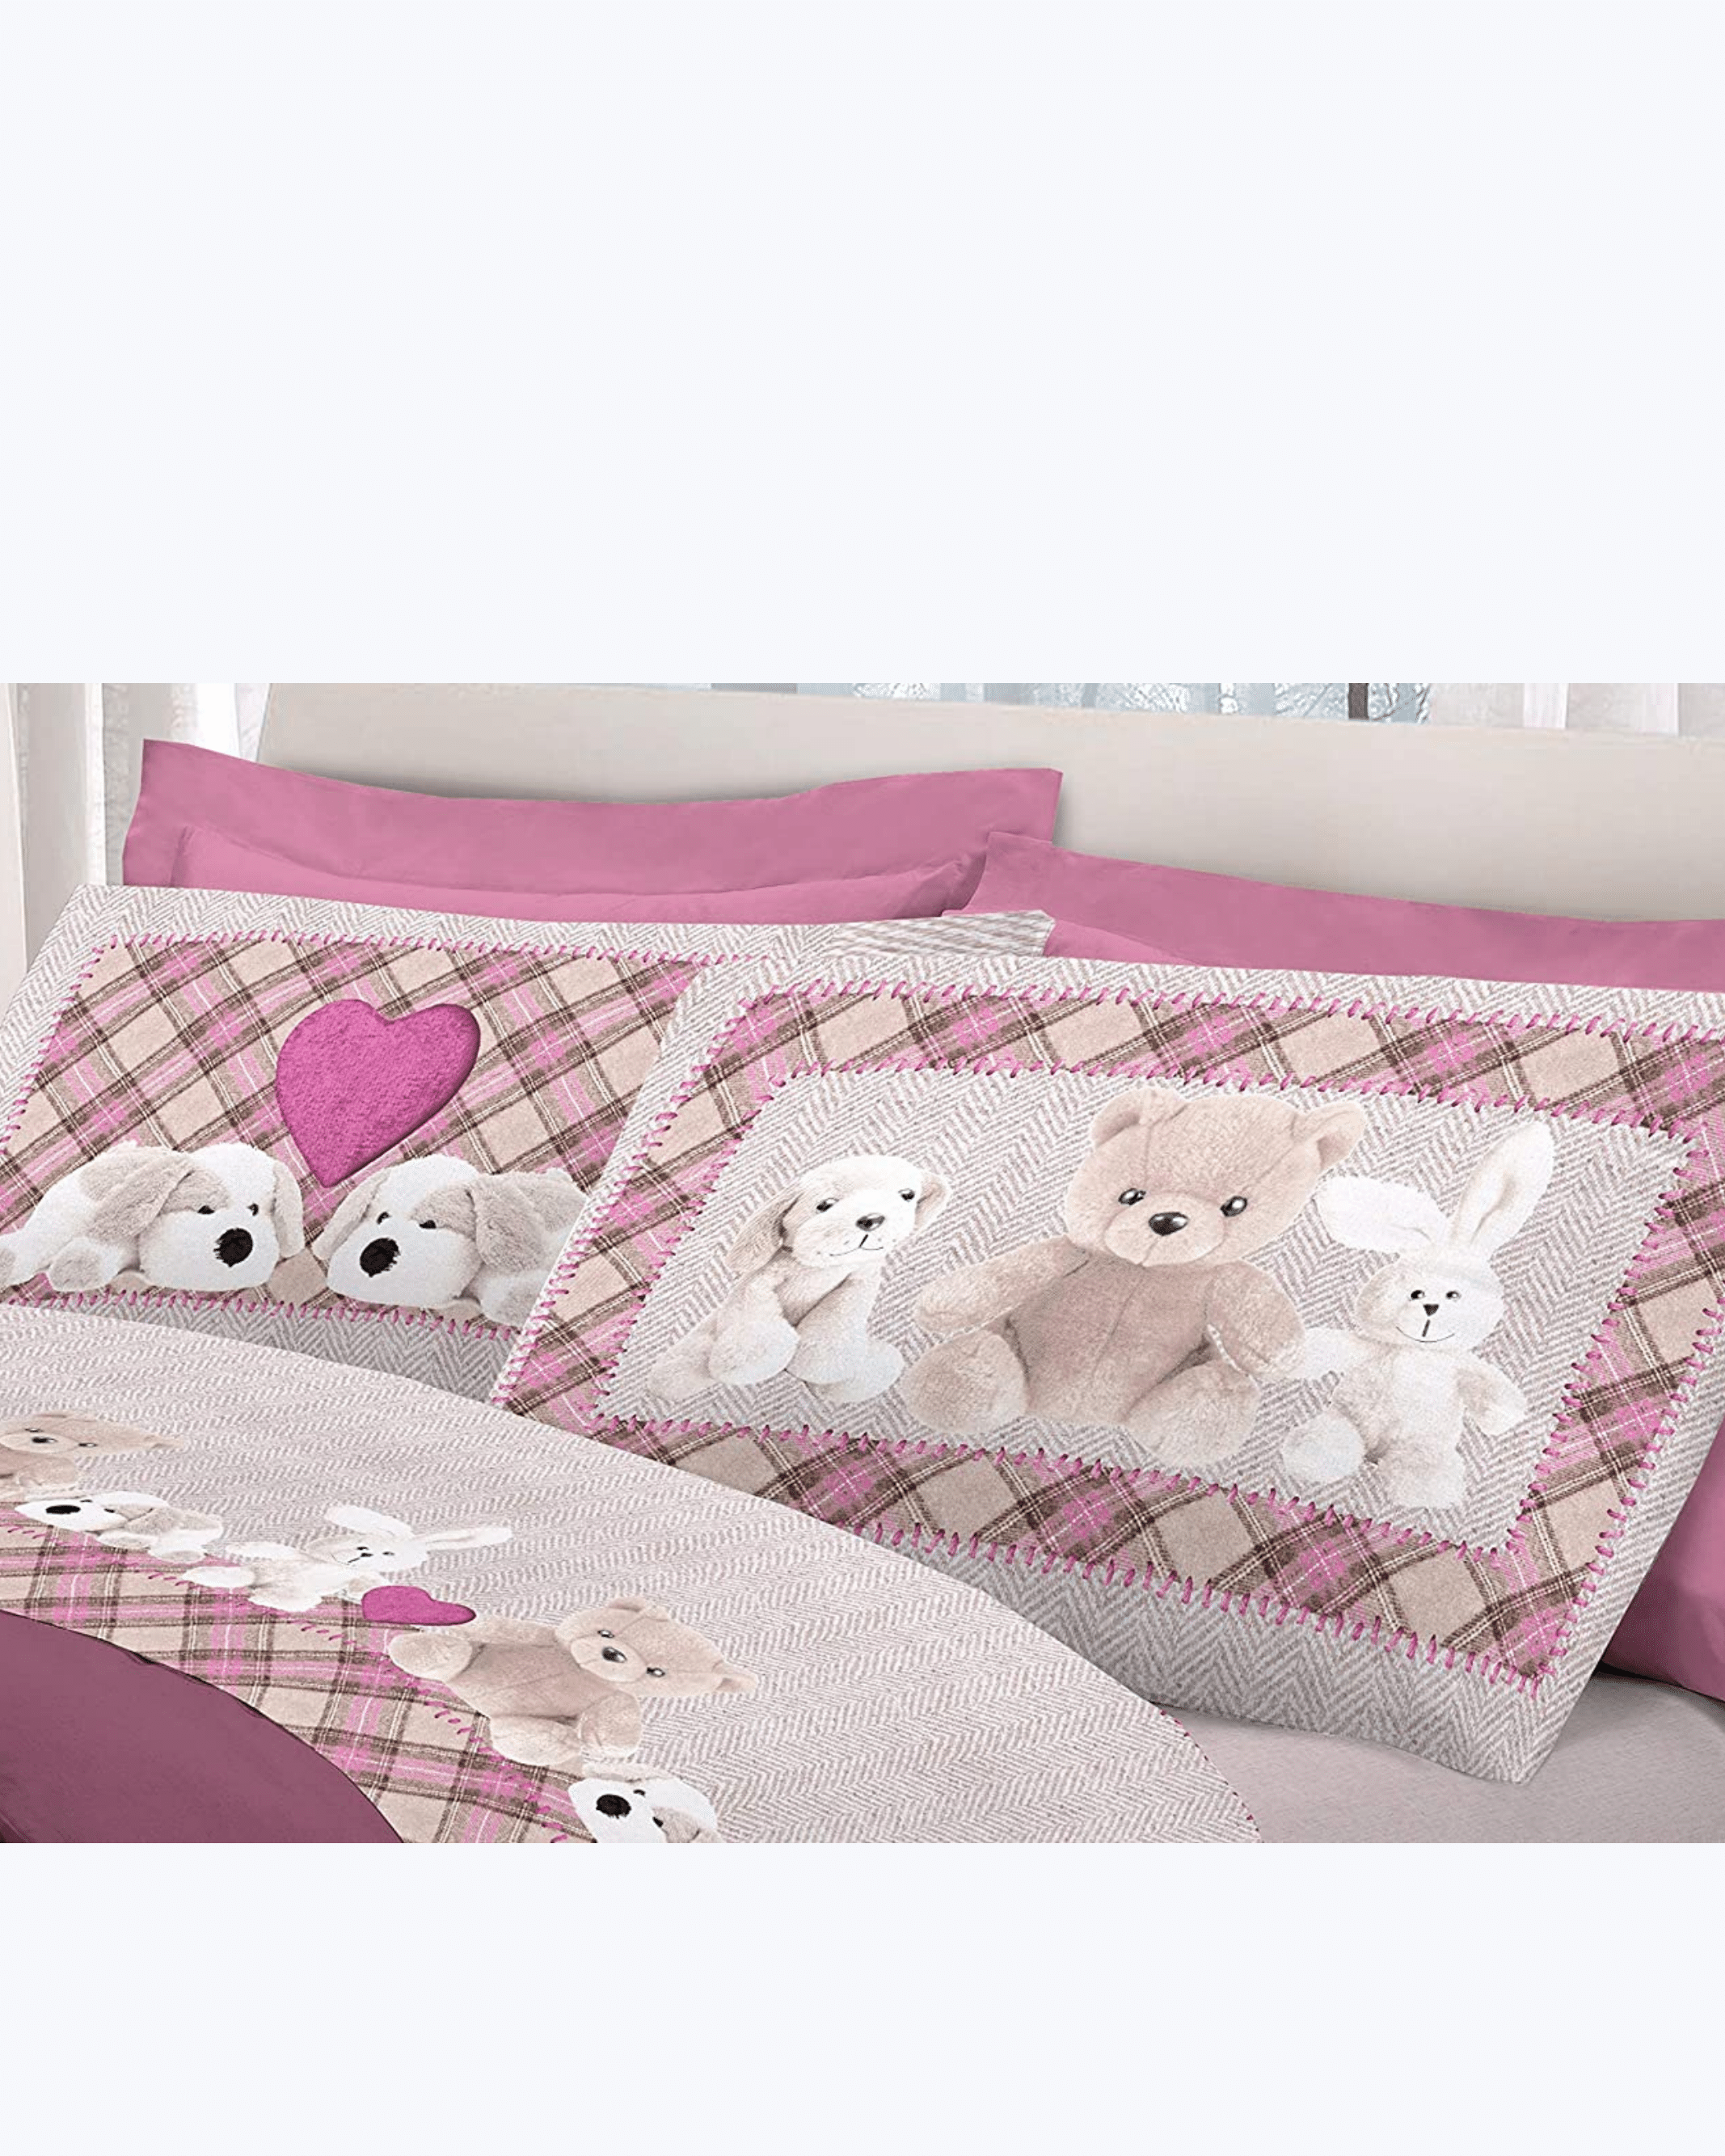 Set Lenzuola Letto in Cotone Made in Italy - Completo Letto Stampa Peluche